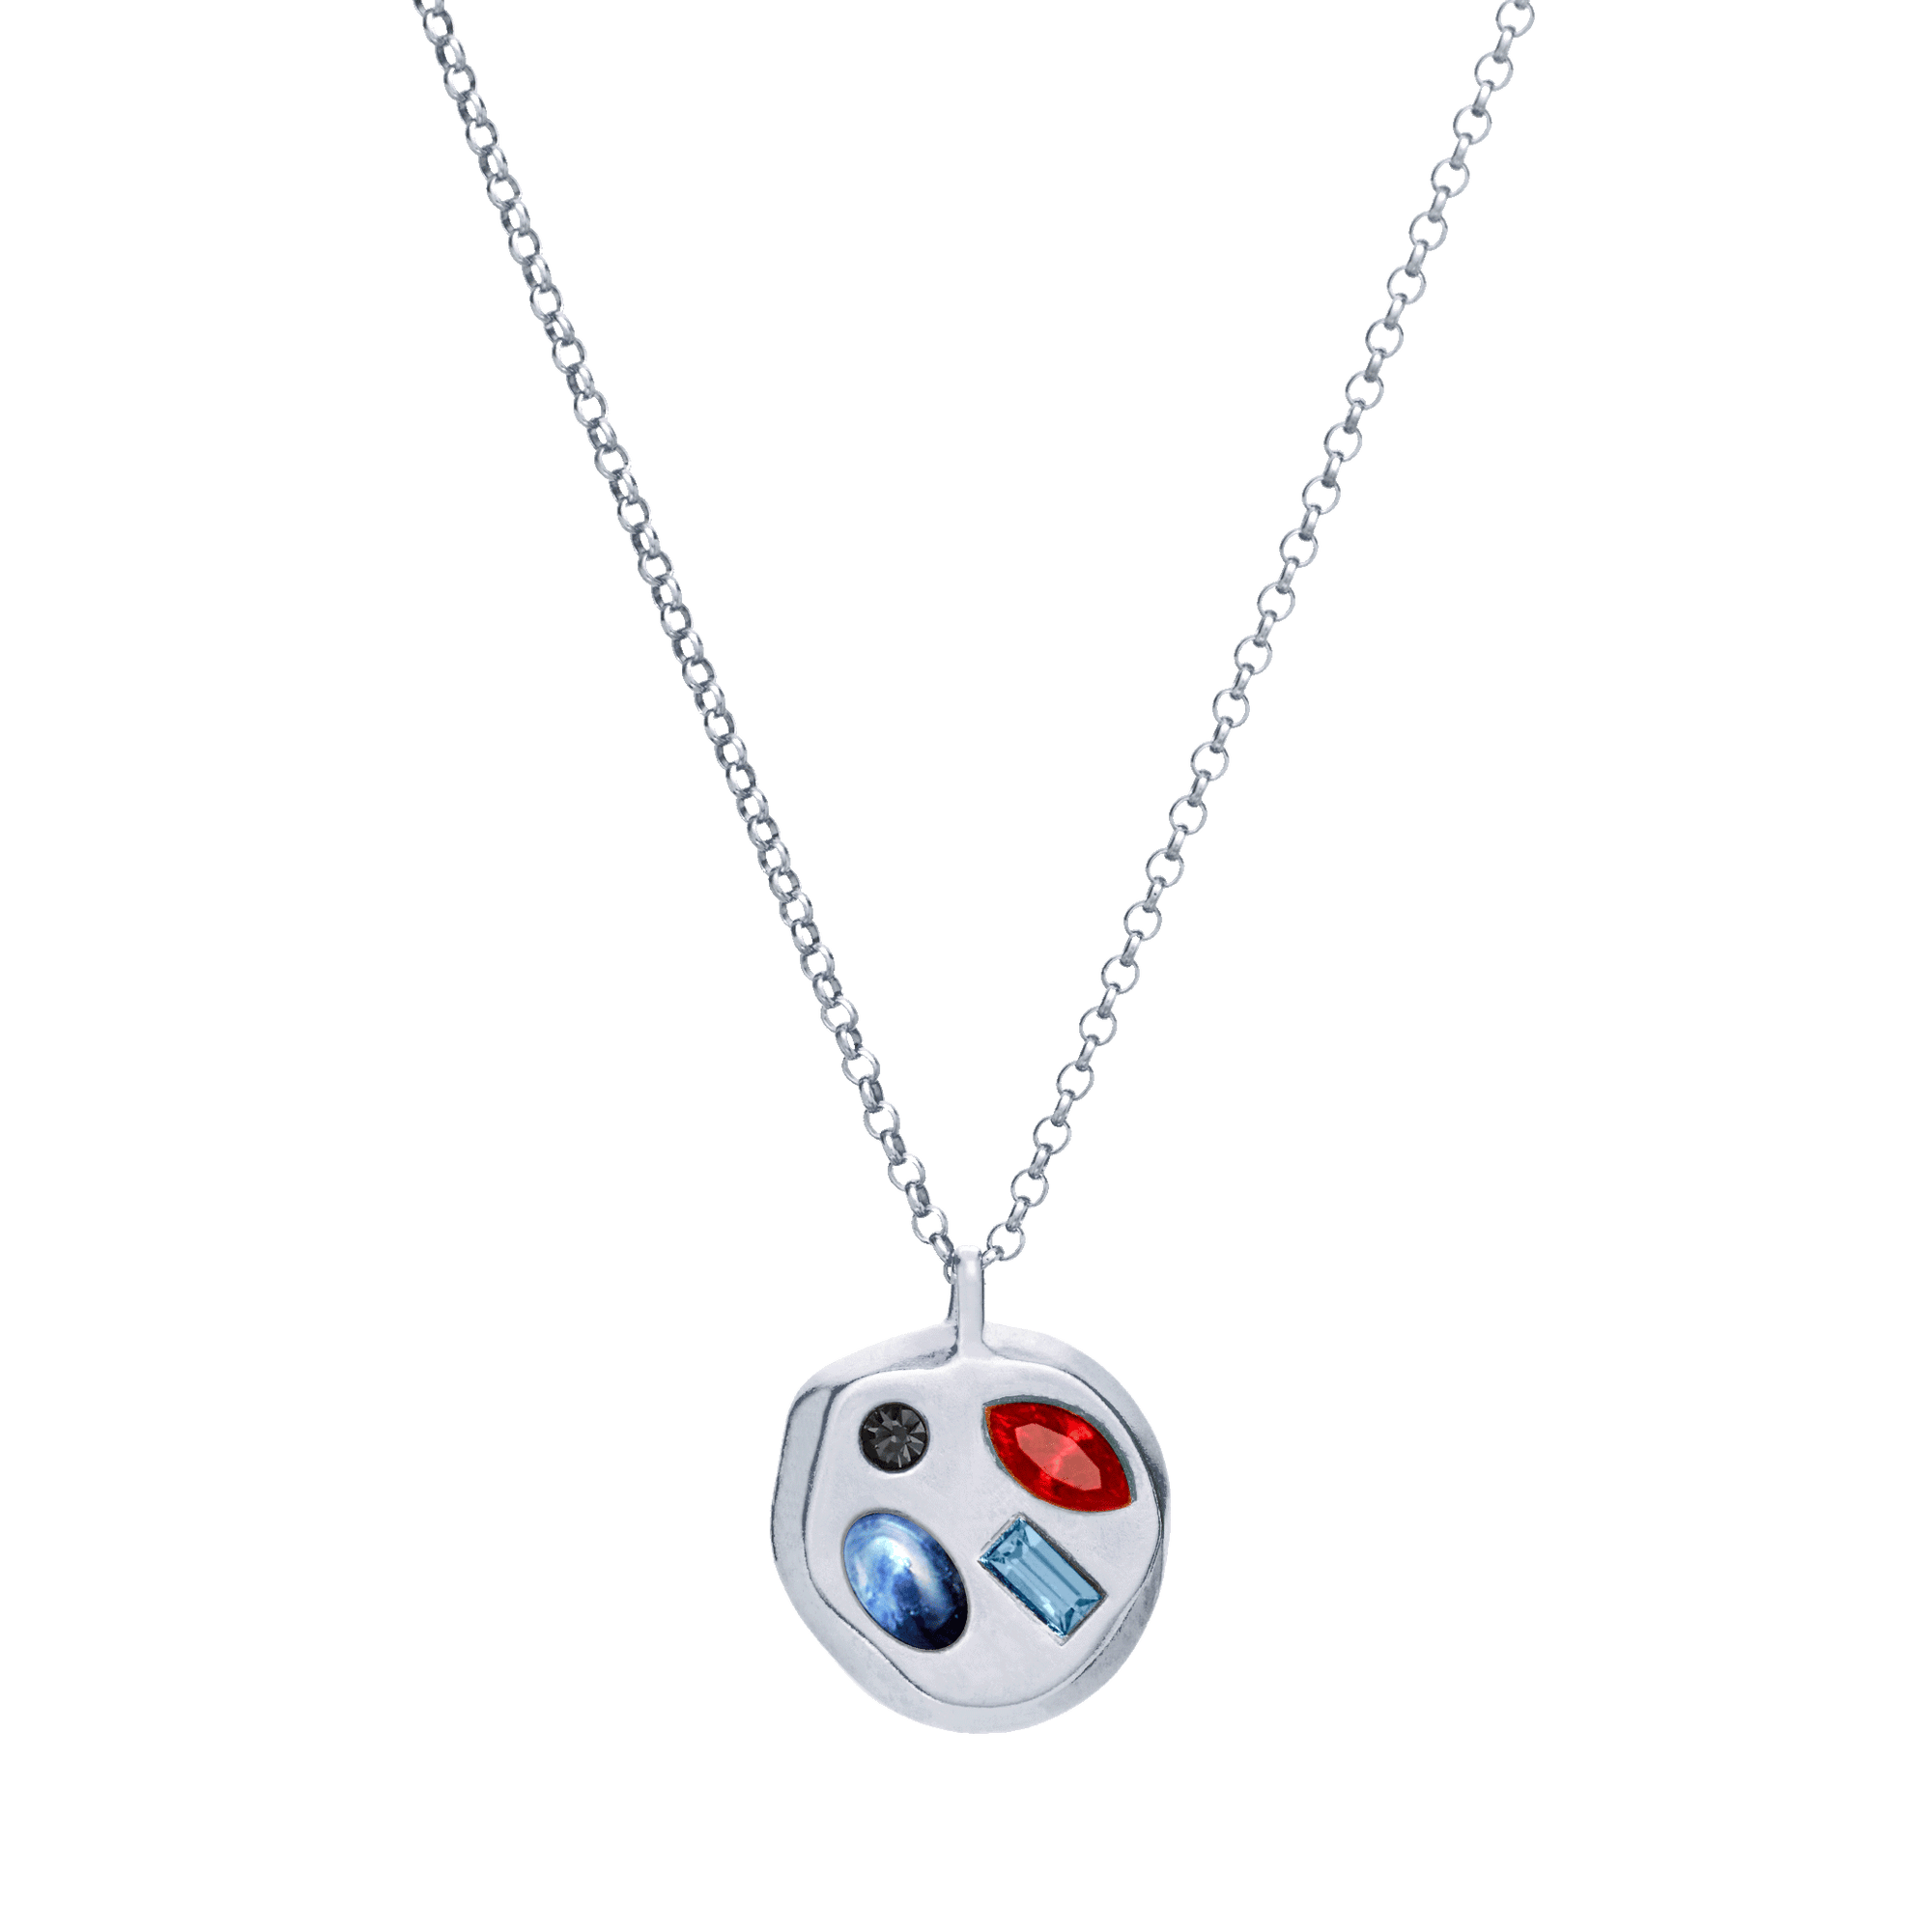 The July Thirteenth Pendant in Sterling Silver